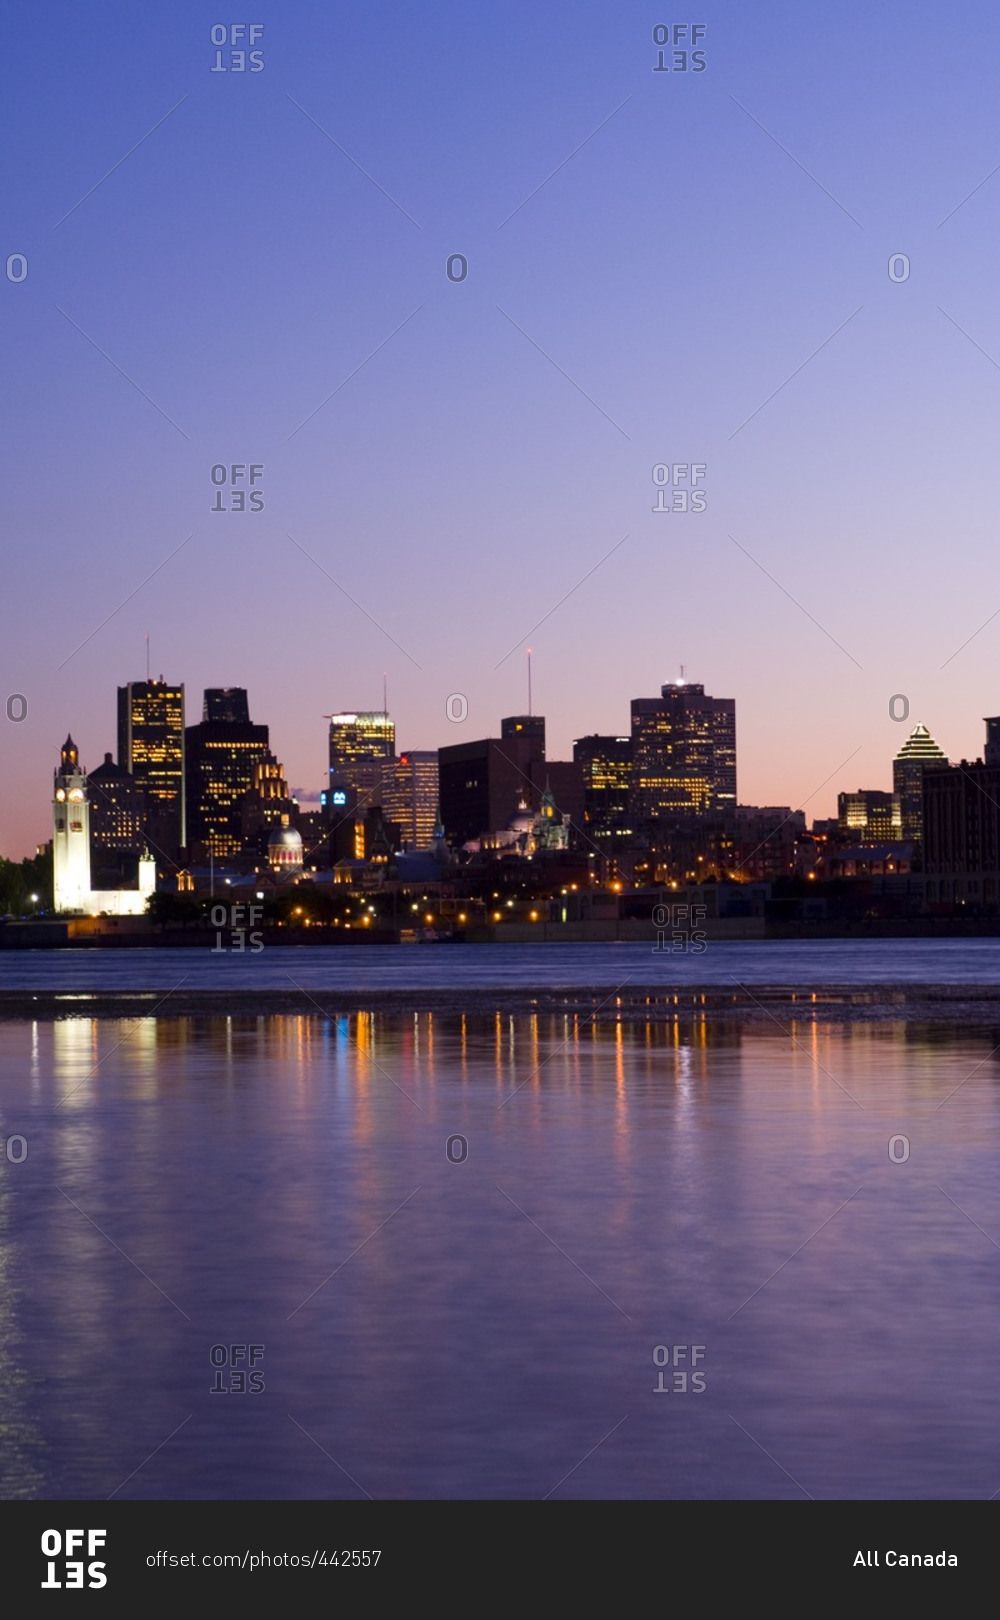 Evening view of skyline with old Montreal in foreground, across St. Lawrence River from Ile Notre-Dame, Montreal, Quebec, Canada.